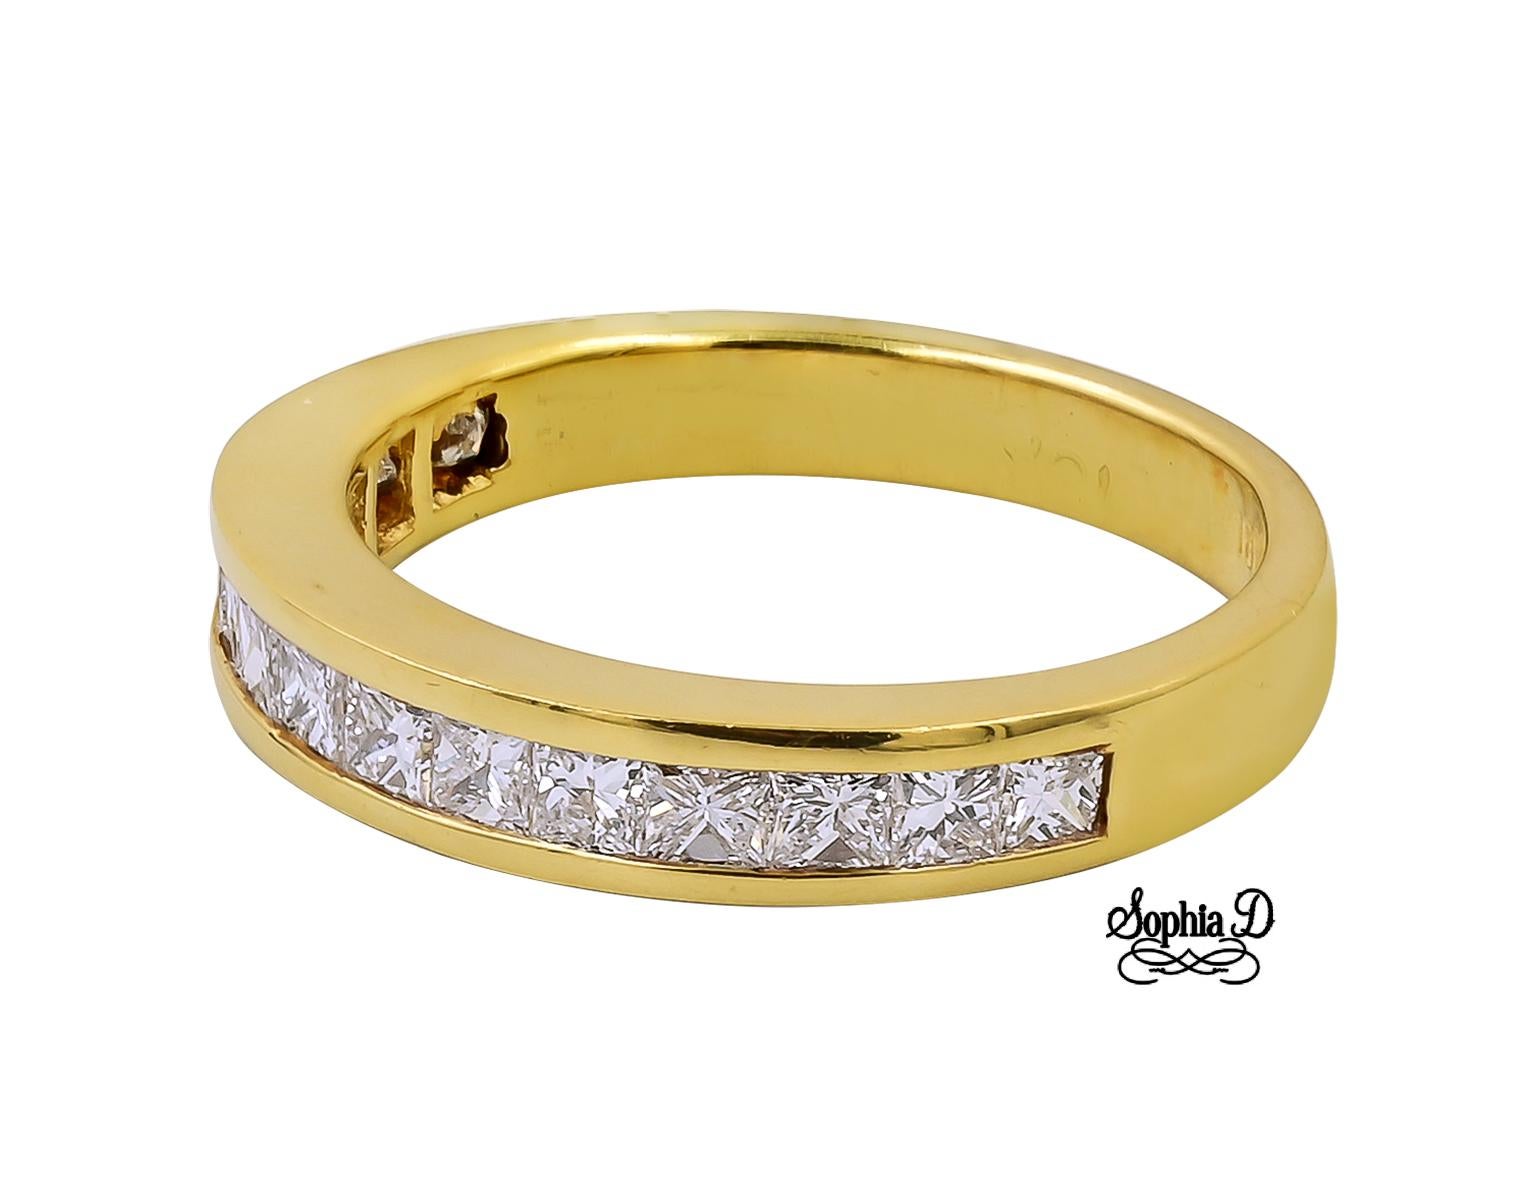 18K yellow gold ring with square cut diamonds.

Sophia D by Joseph Dardashti LTD has been known worldwide for 35 years and are inspired by classic Art Deco design that merges with modern manufacturing techniques.  